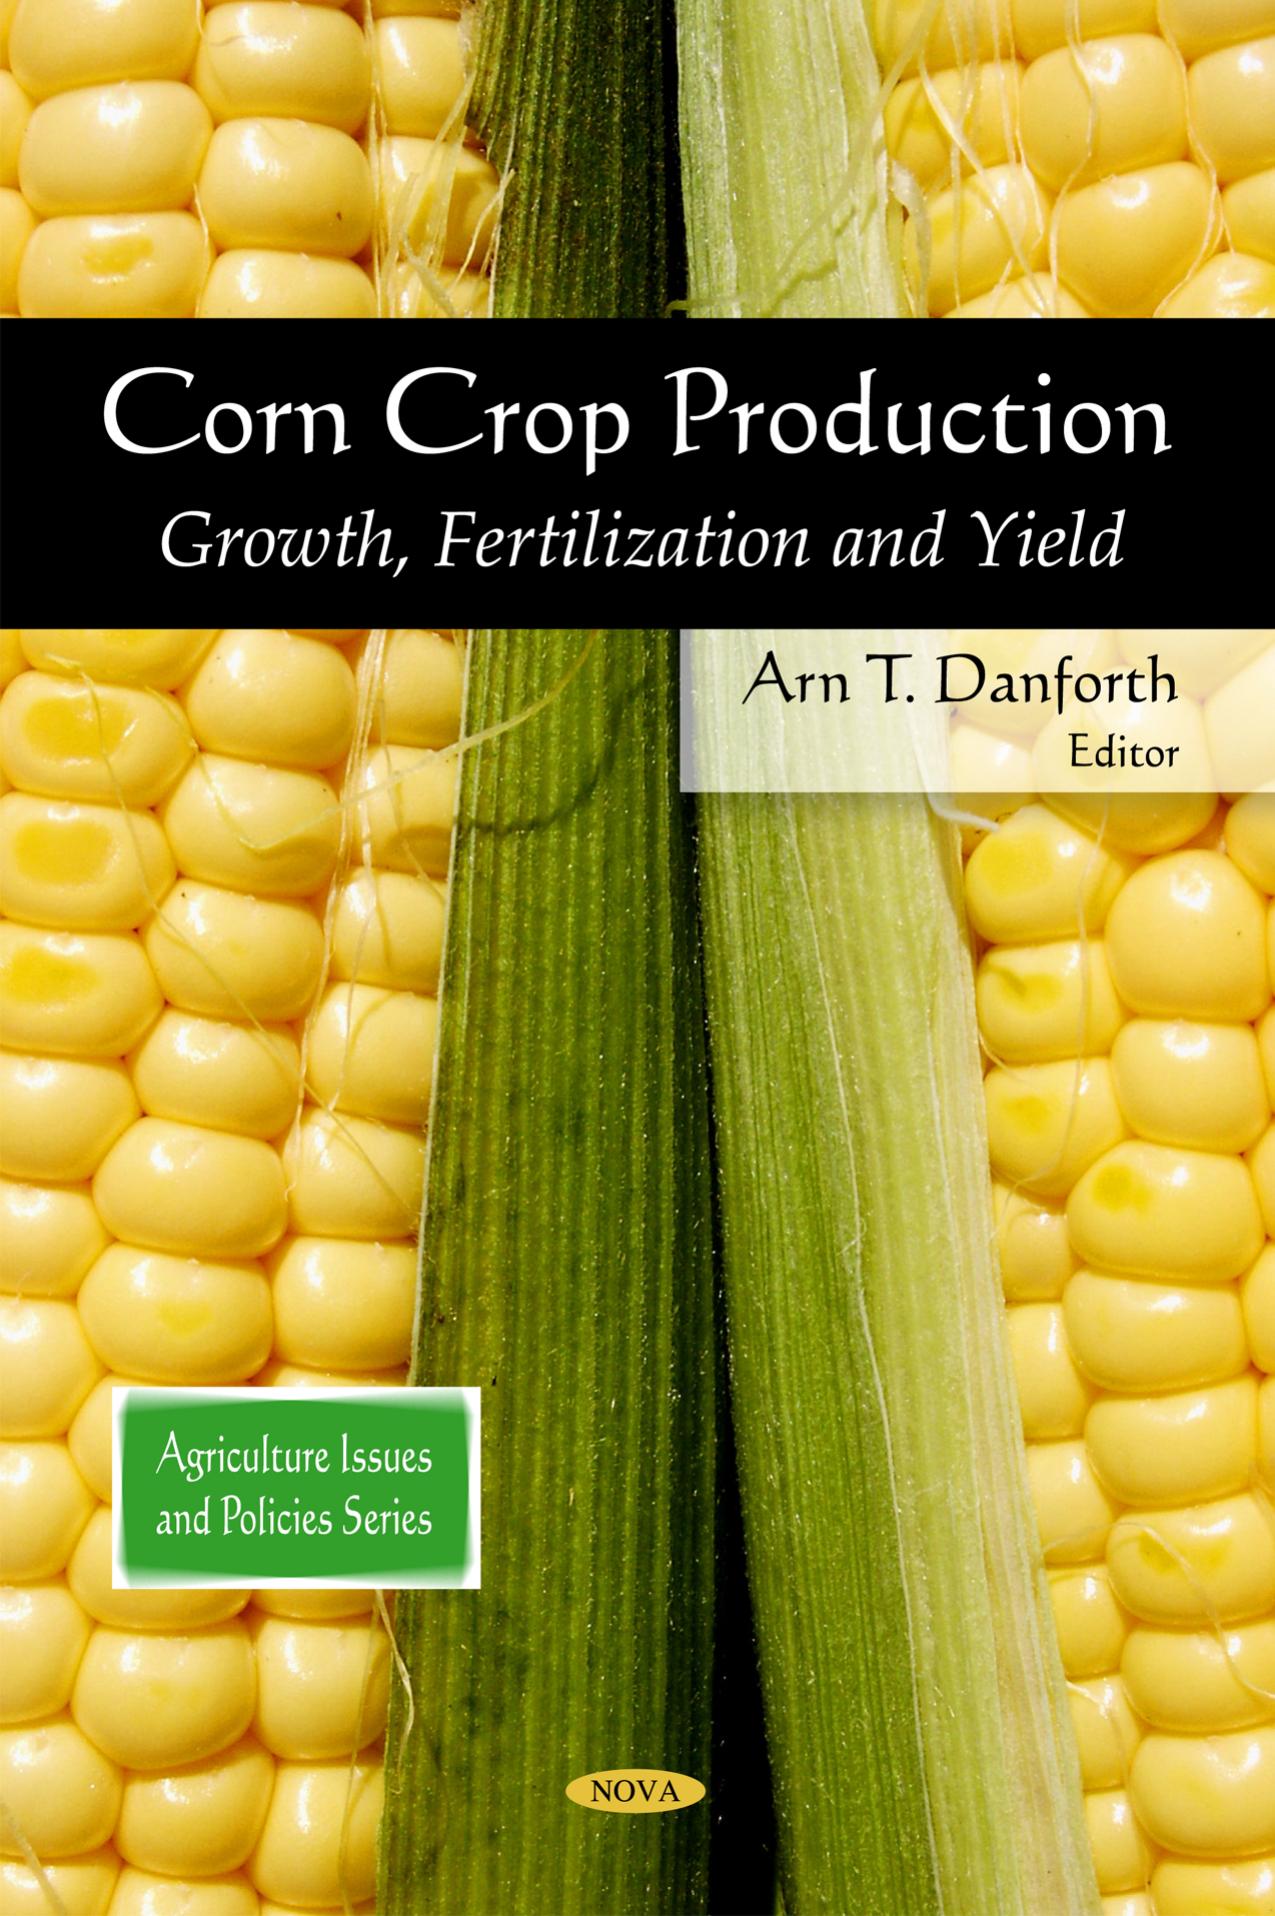 CORN CROP PRODUCTION: GROWTH, FERTILIZATION AND YIELD